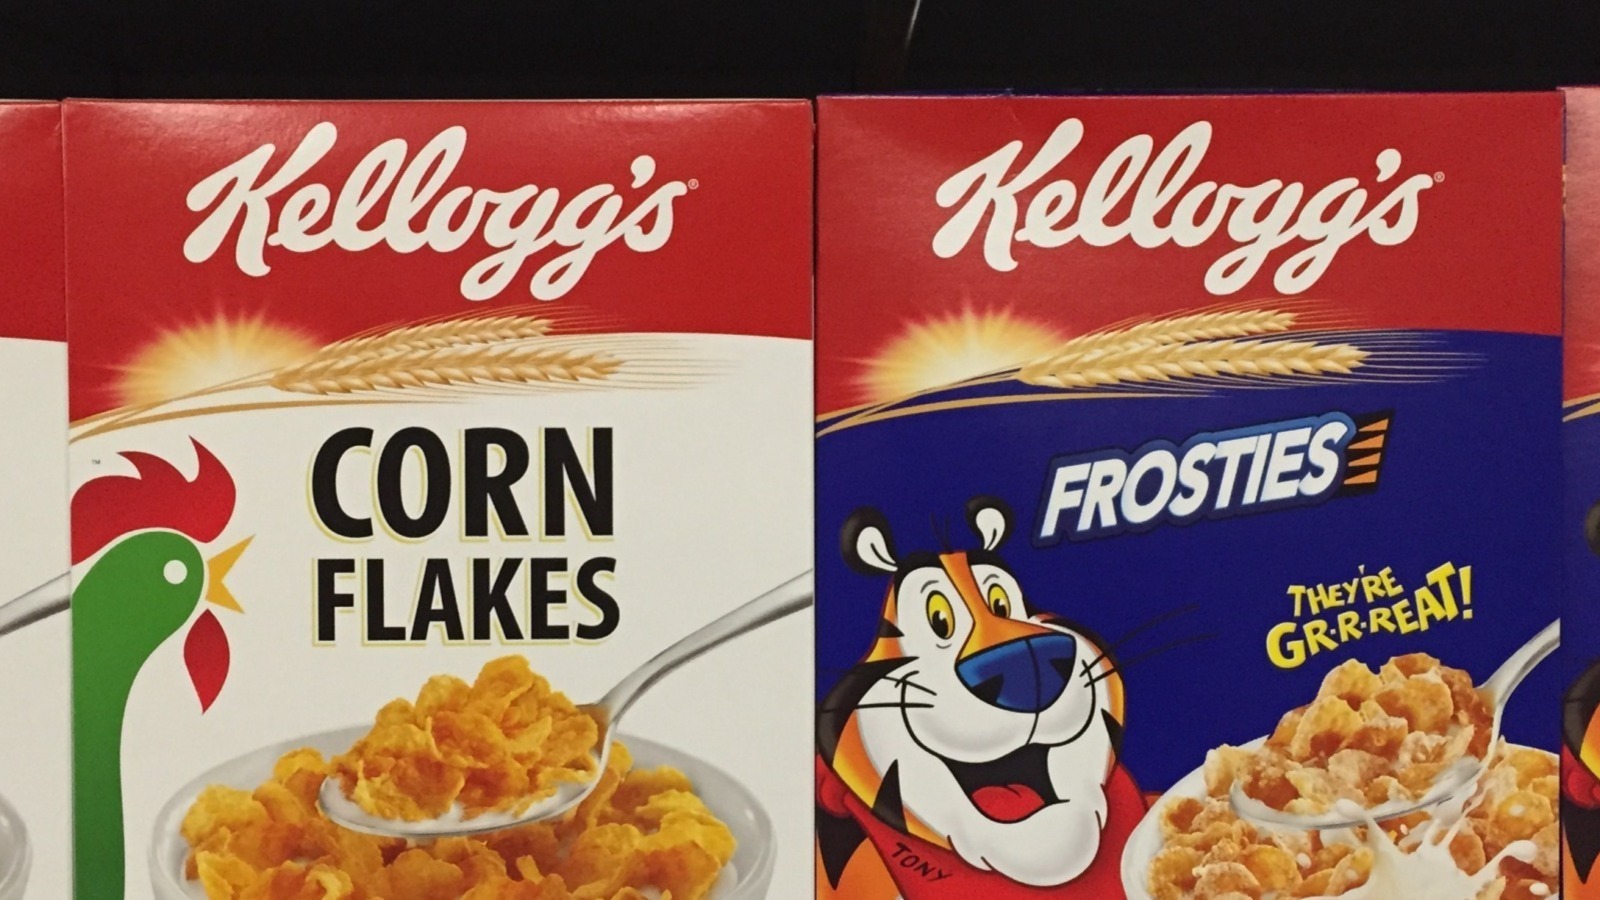 The Kellogg's Strike Is Finally Over